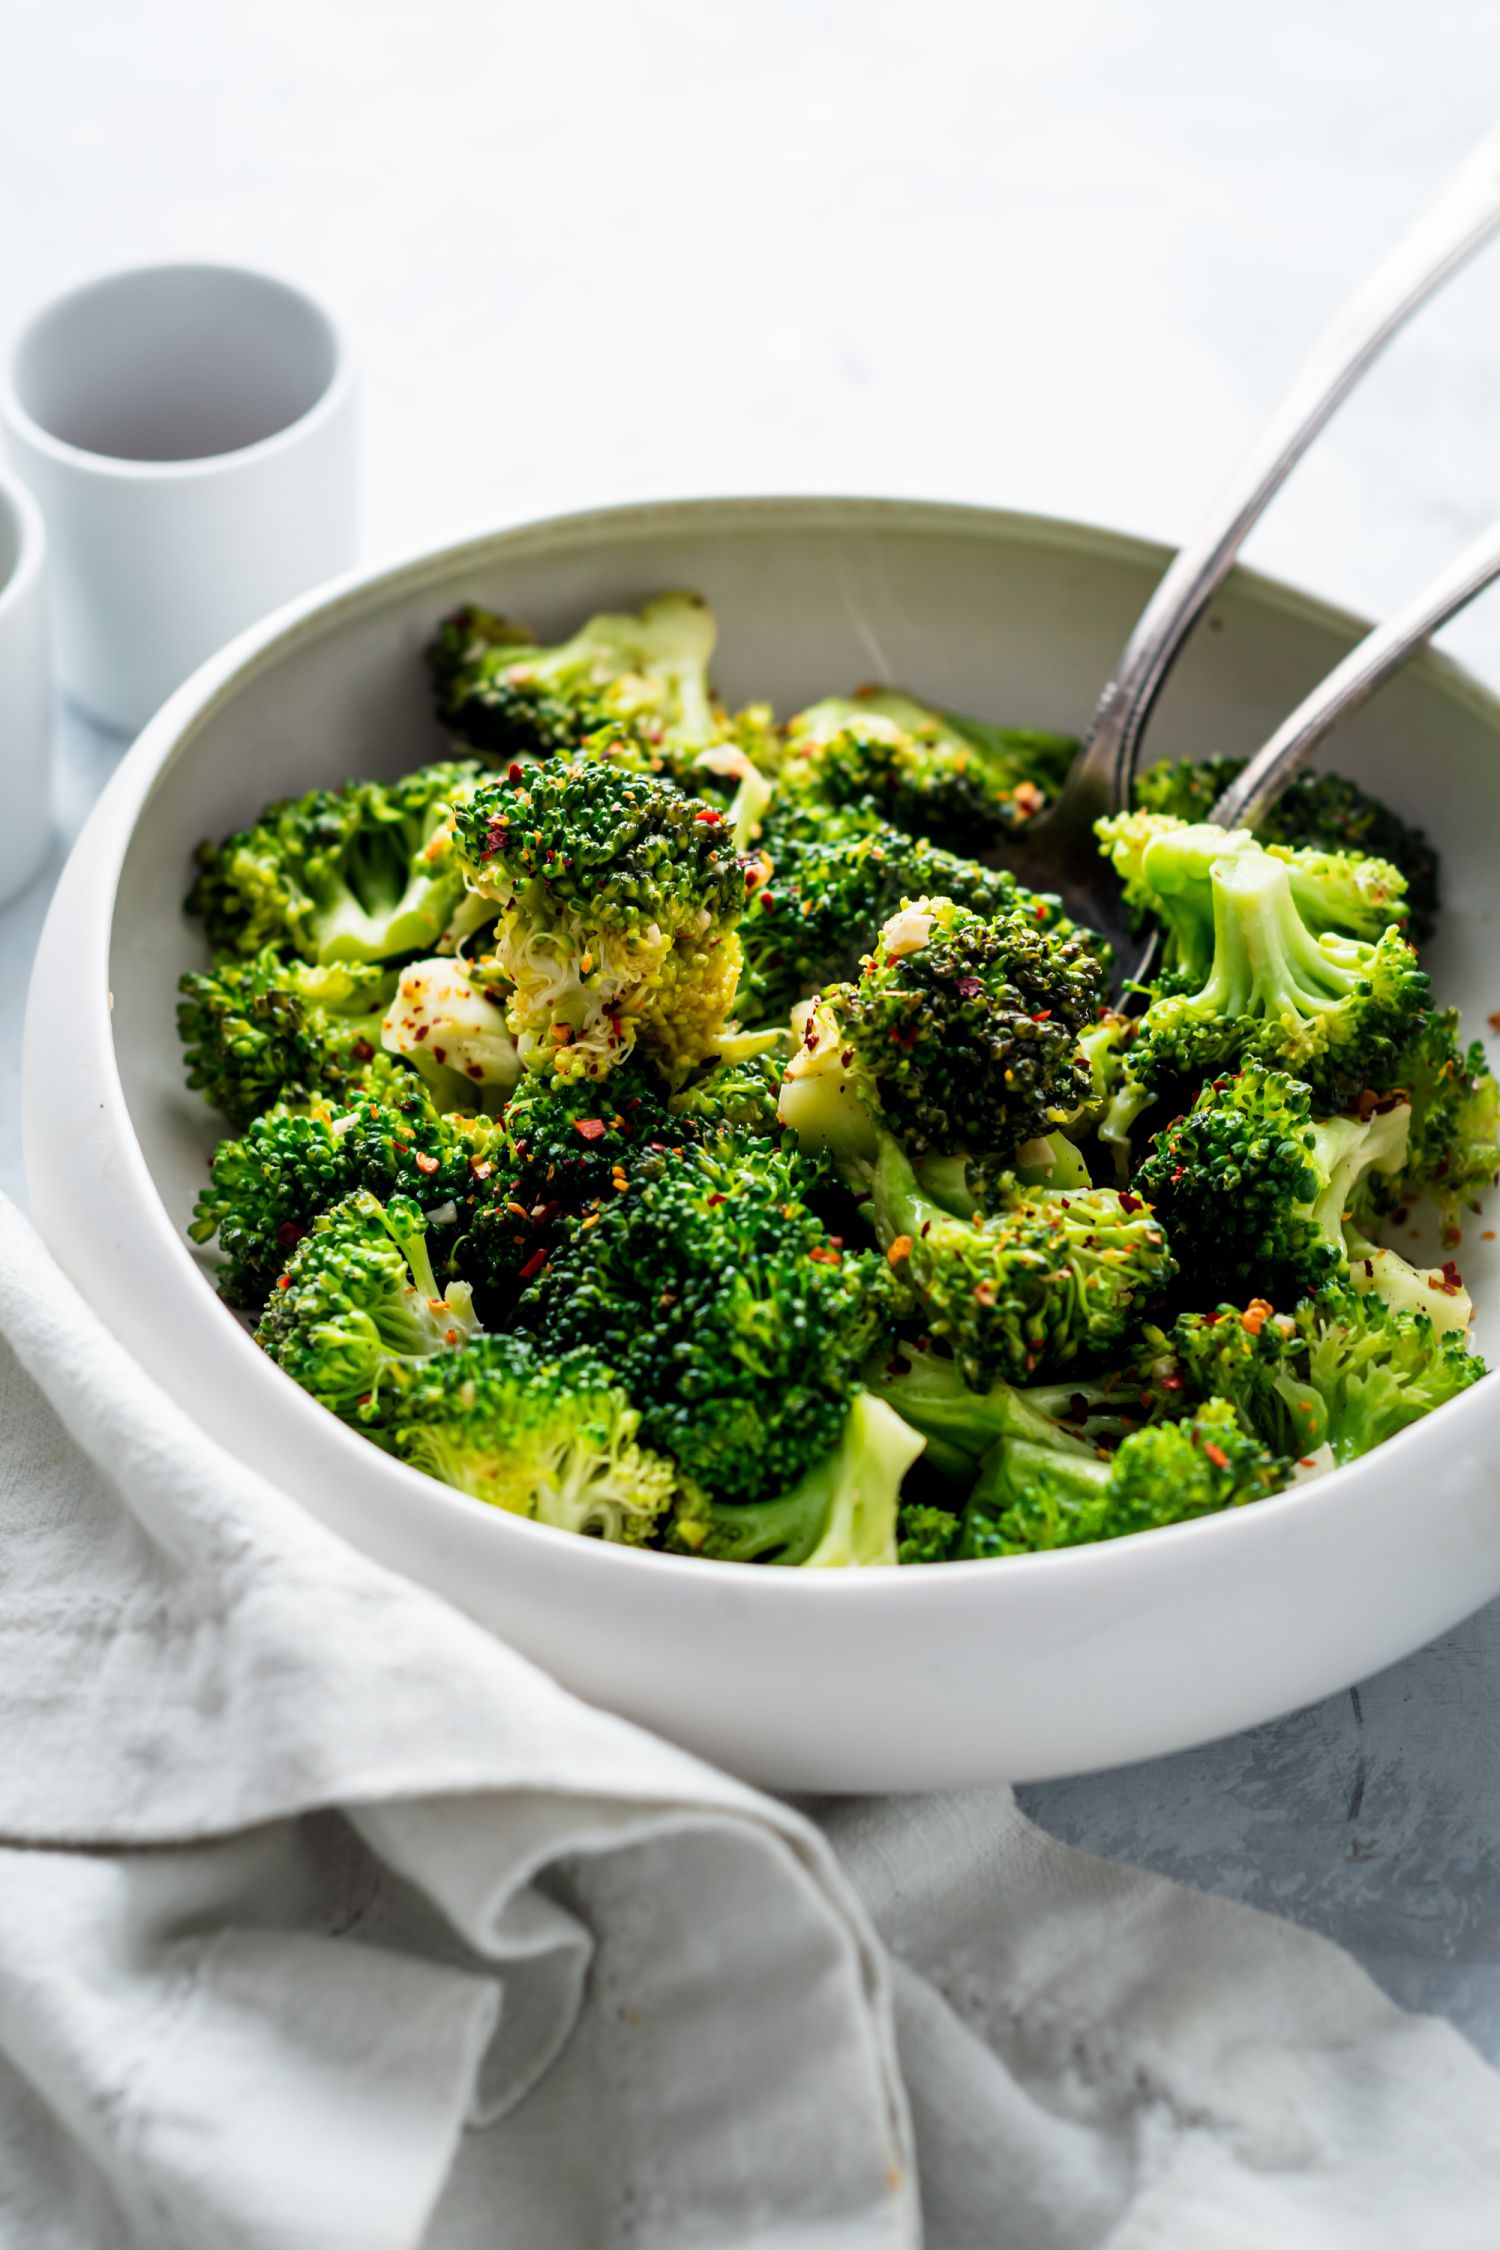 Crispy pan fried broccoli in a white bowl with a white napkin and two serving spoons.